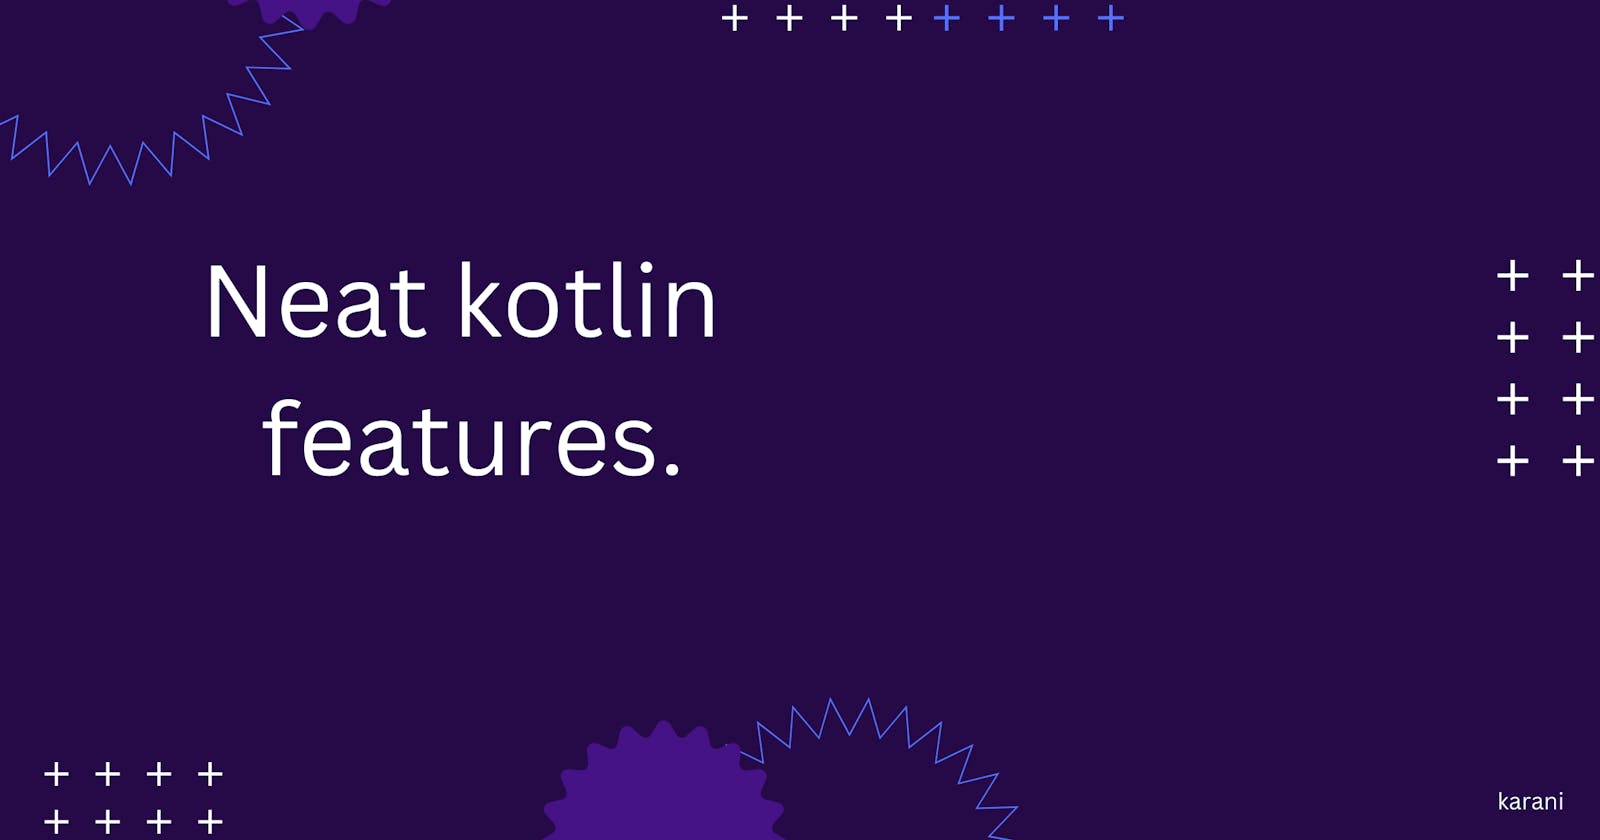 Some neat kotlin features